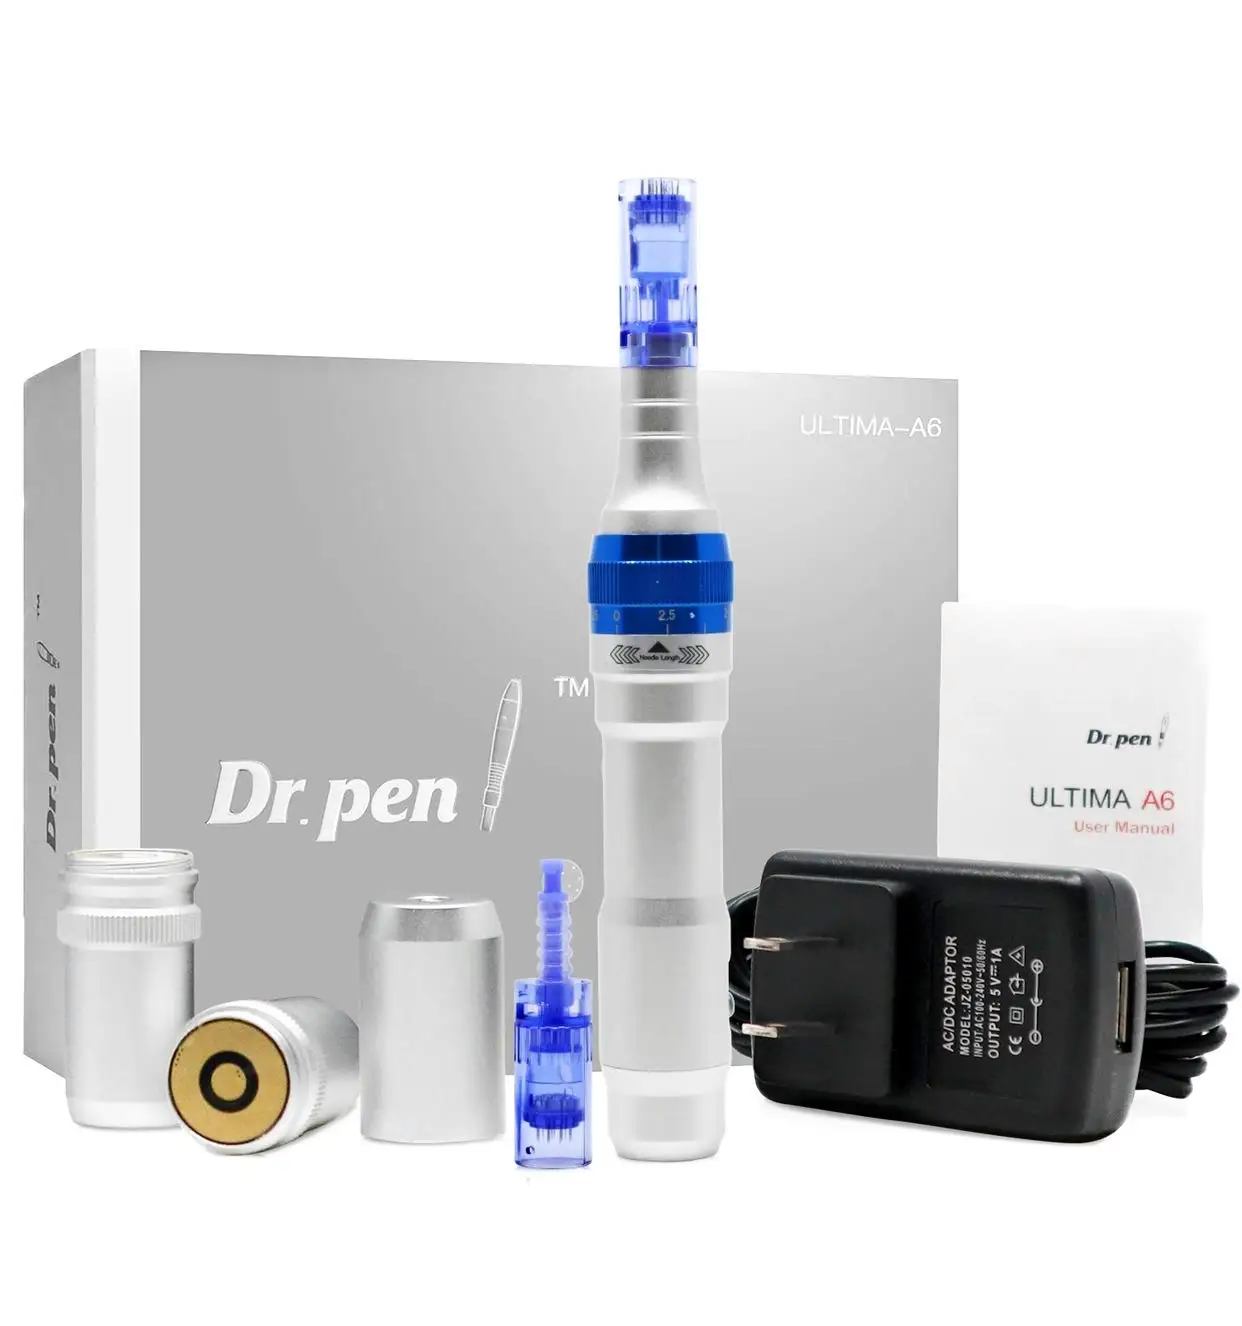 dermapen Dr.Pen Ultima A6 Professional Microneedling Pen Wireless Electric Skin Care Tools with 5 speeds